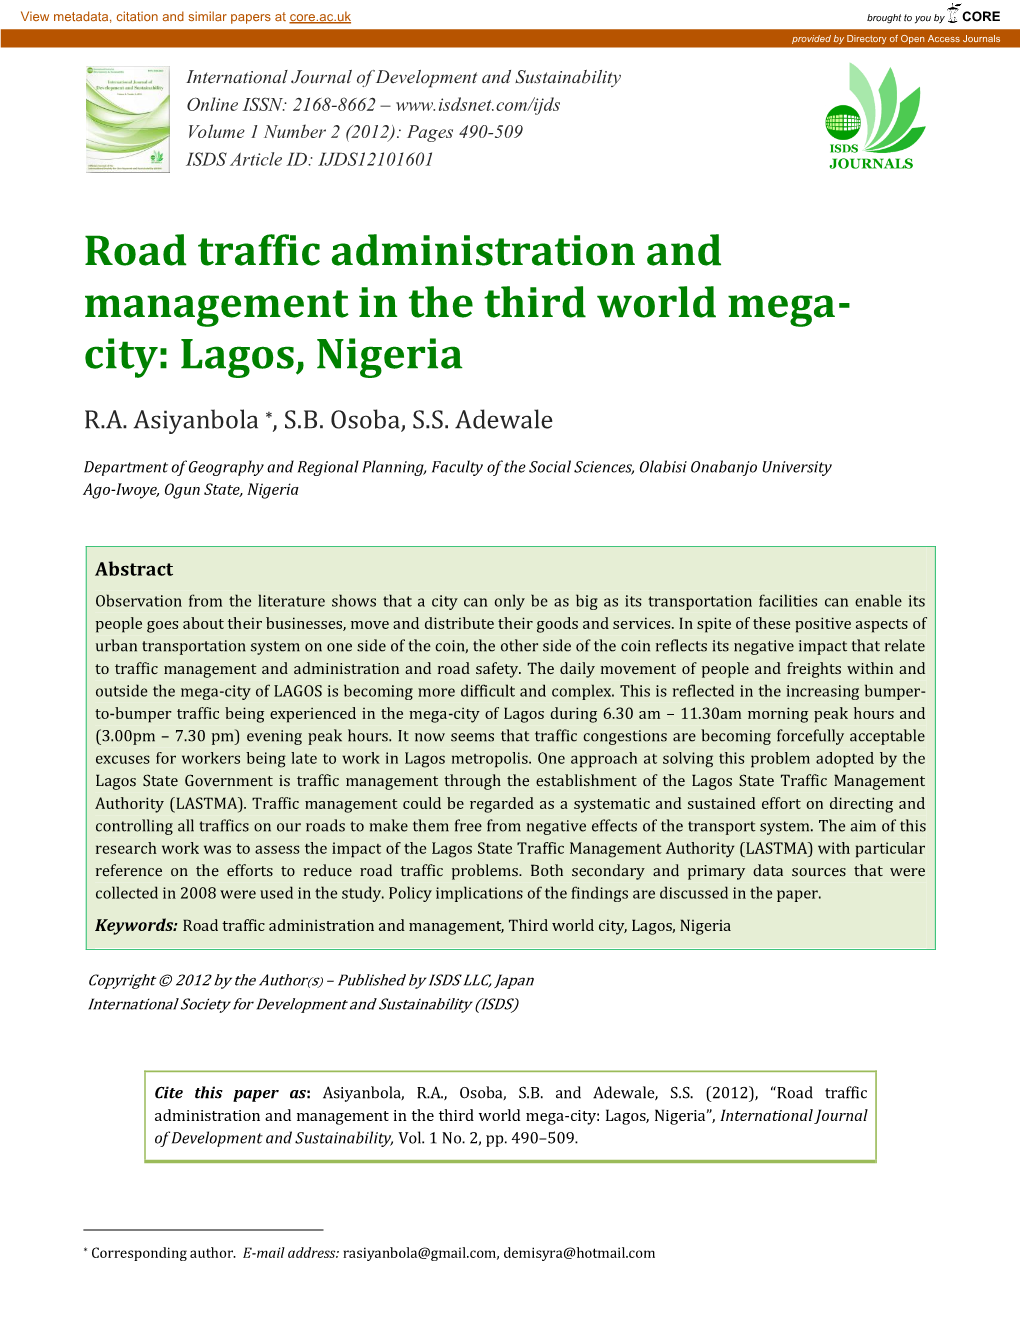 Road Traffic Administration and Management in the Third World Mega- City: Lagos, Nigeria